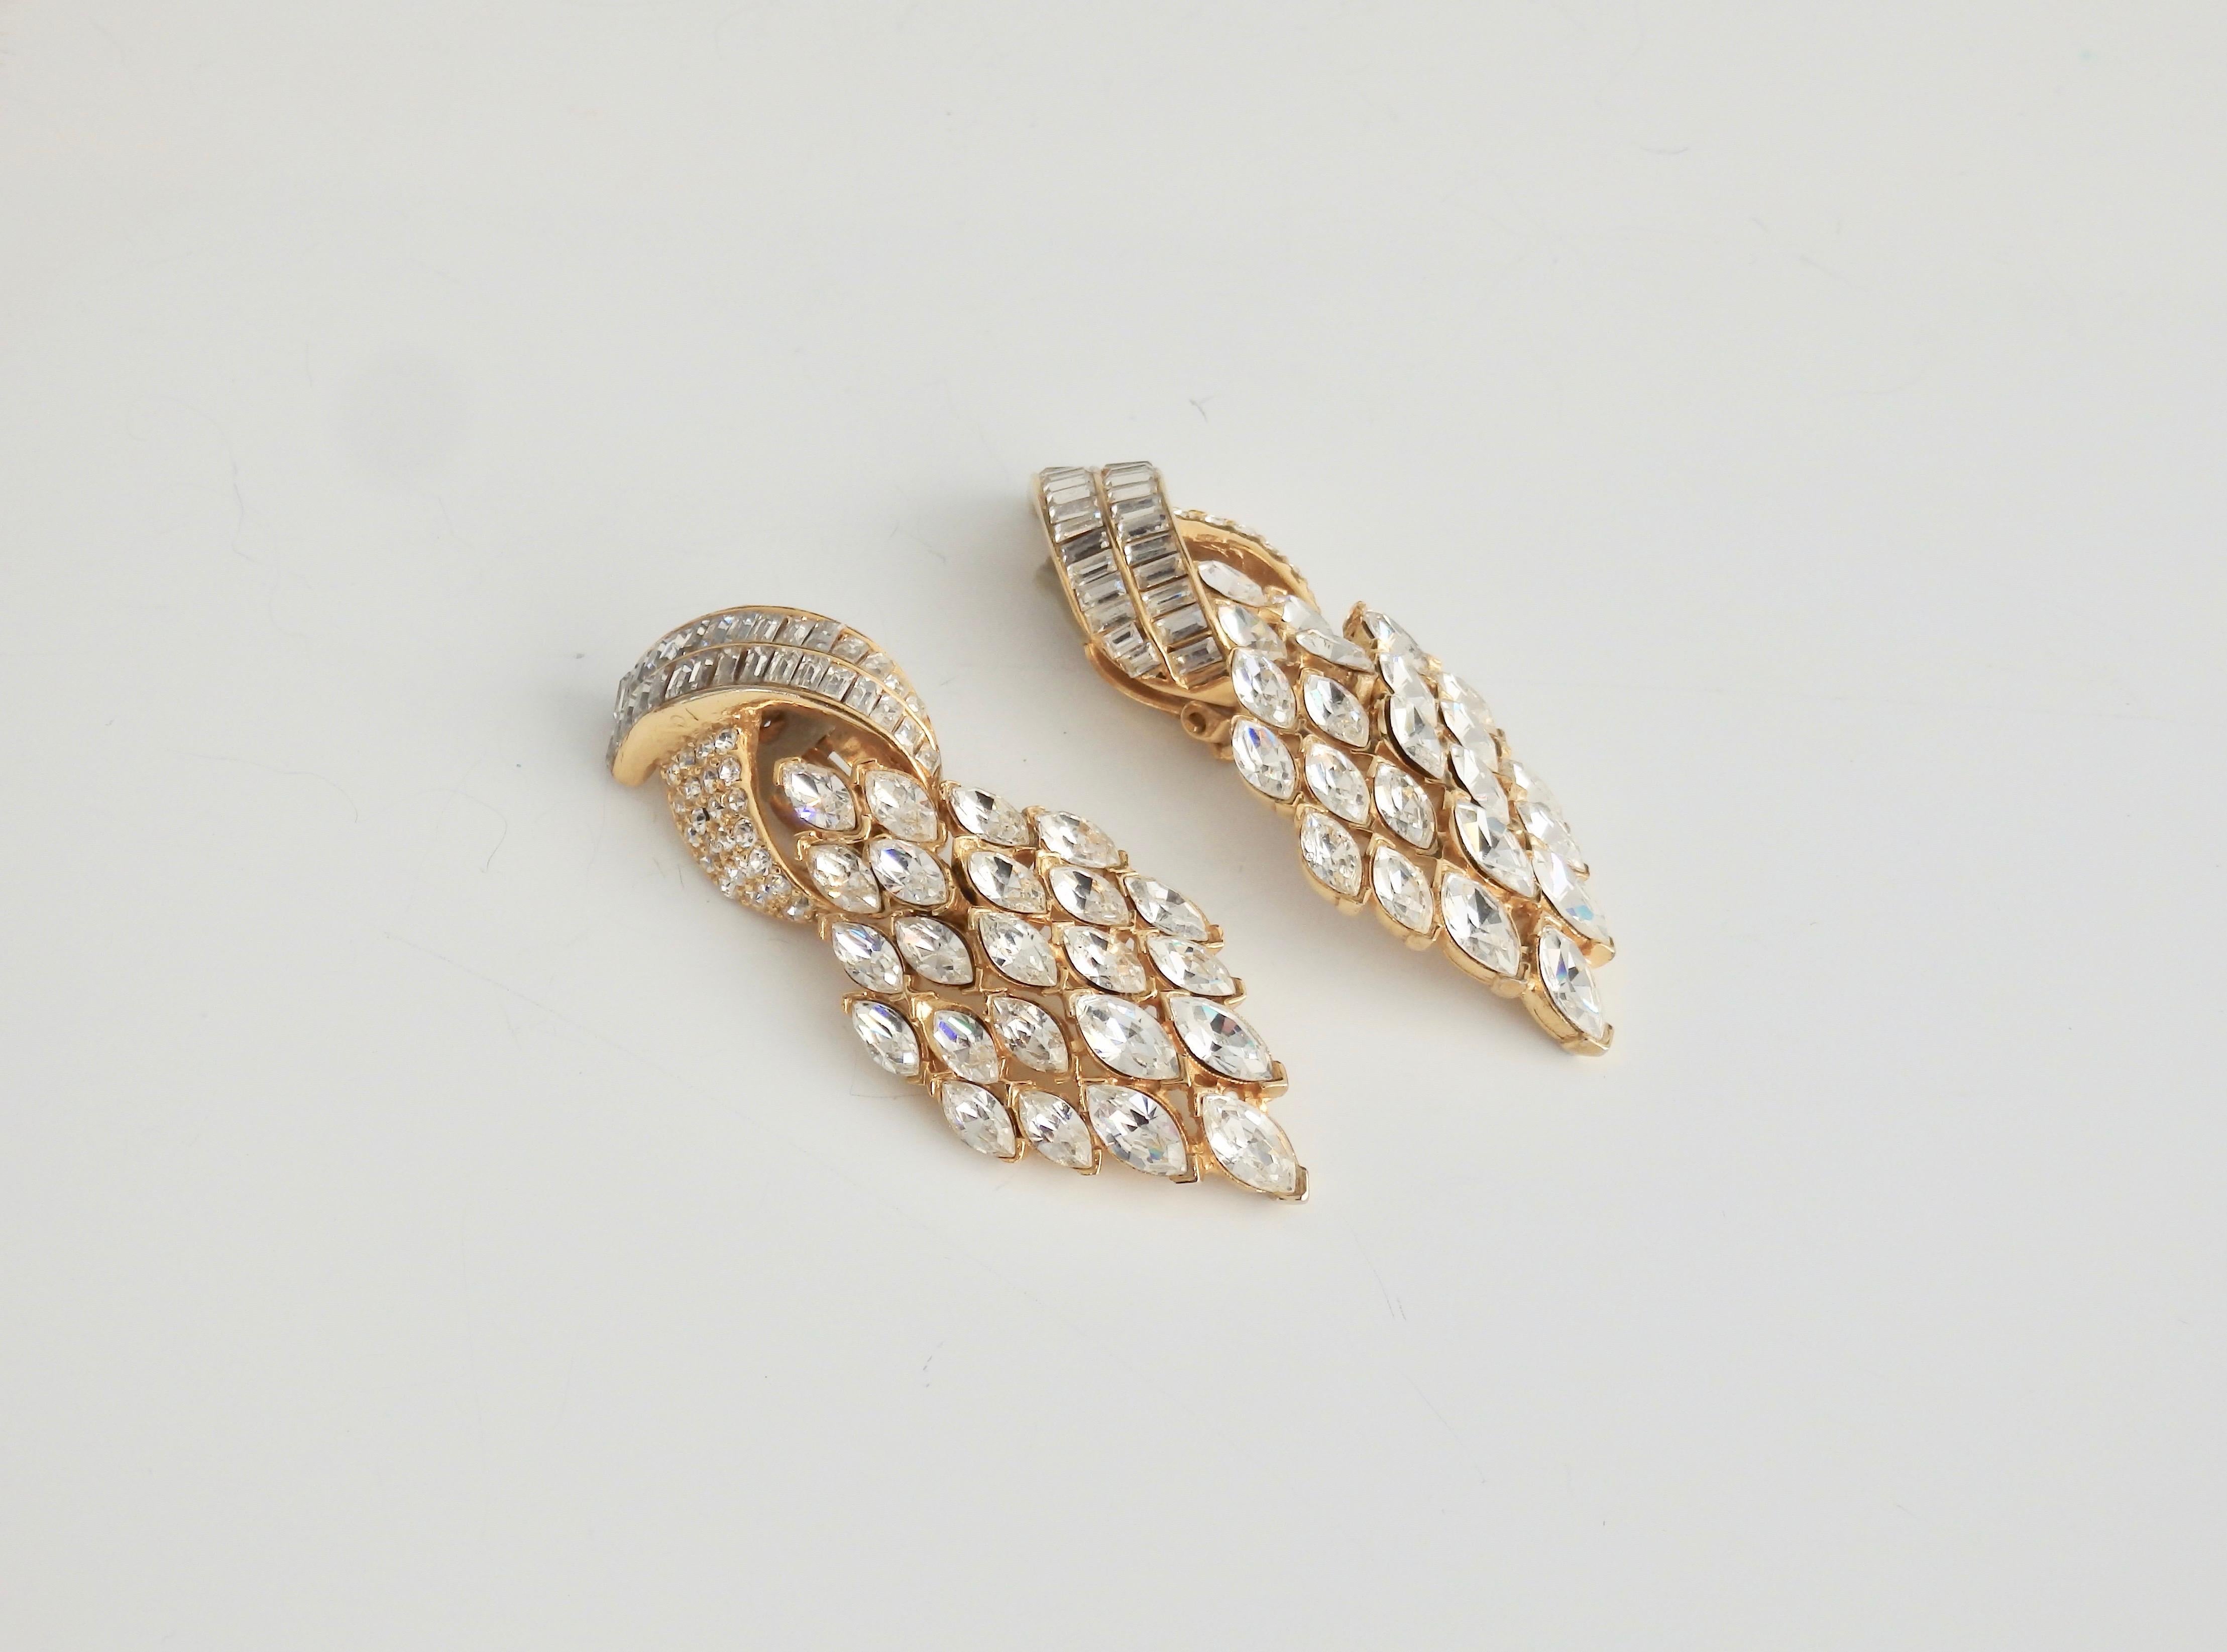 Swarovski crystals make these stunning and gorgeous statement earrings perfect for that glamorous look. Vintage 1980s punch with Art Deco timeless style. Gold plated white metal (the Ciner family business became known for perfecting the use of white